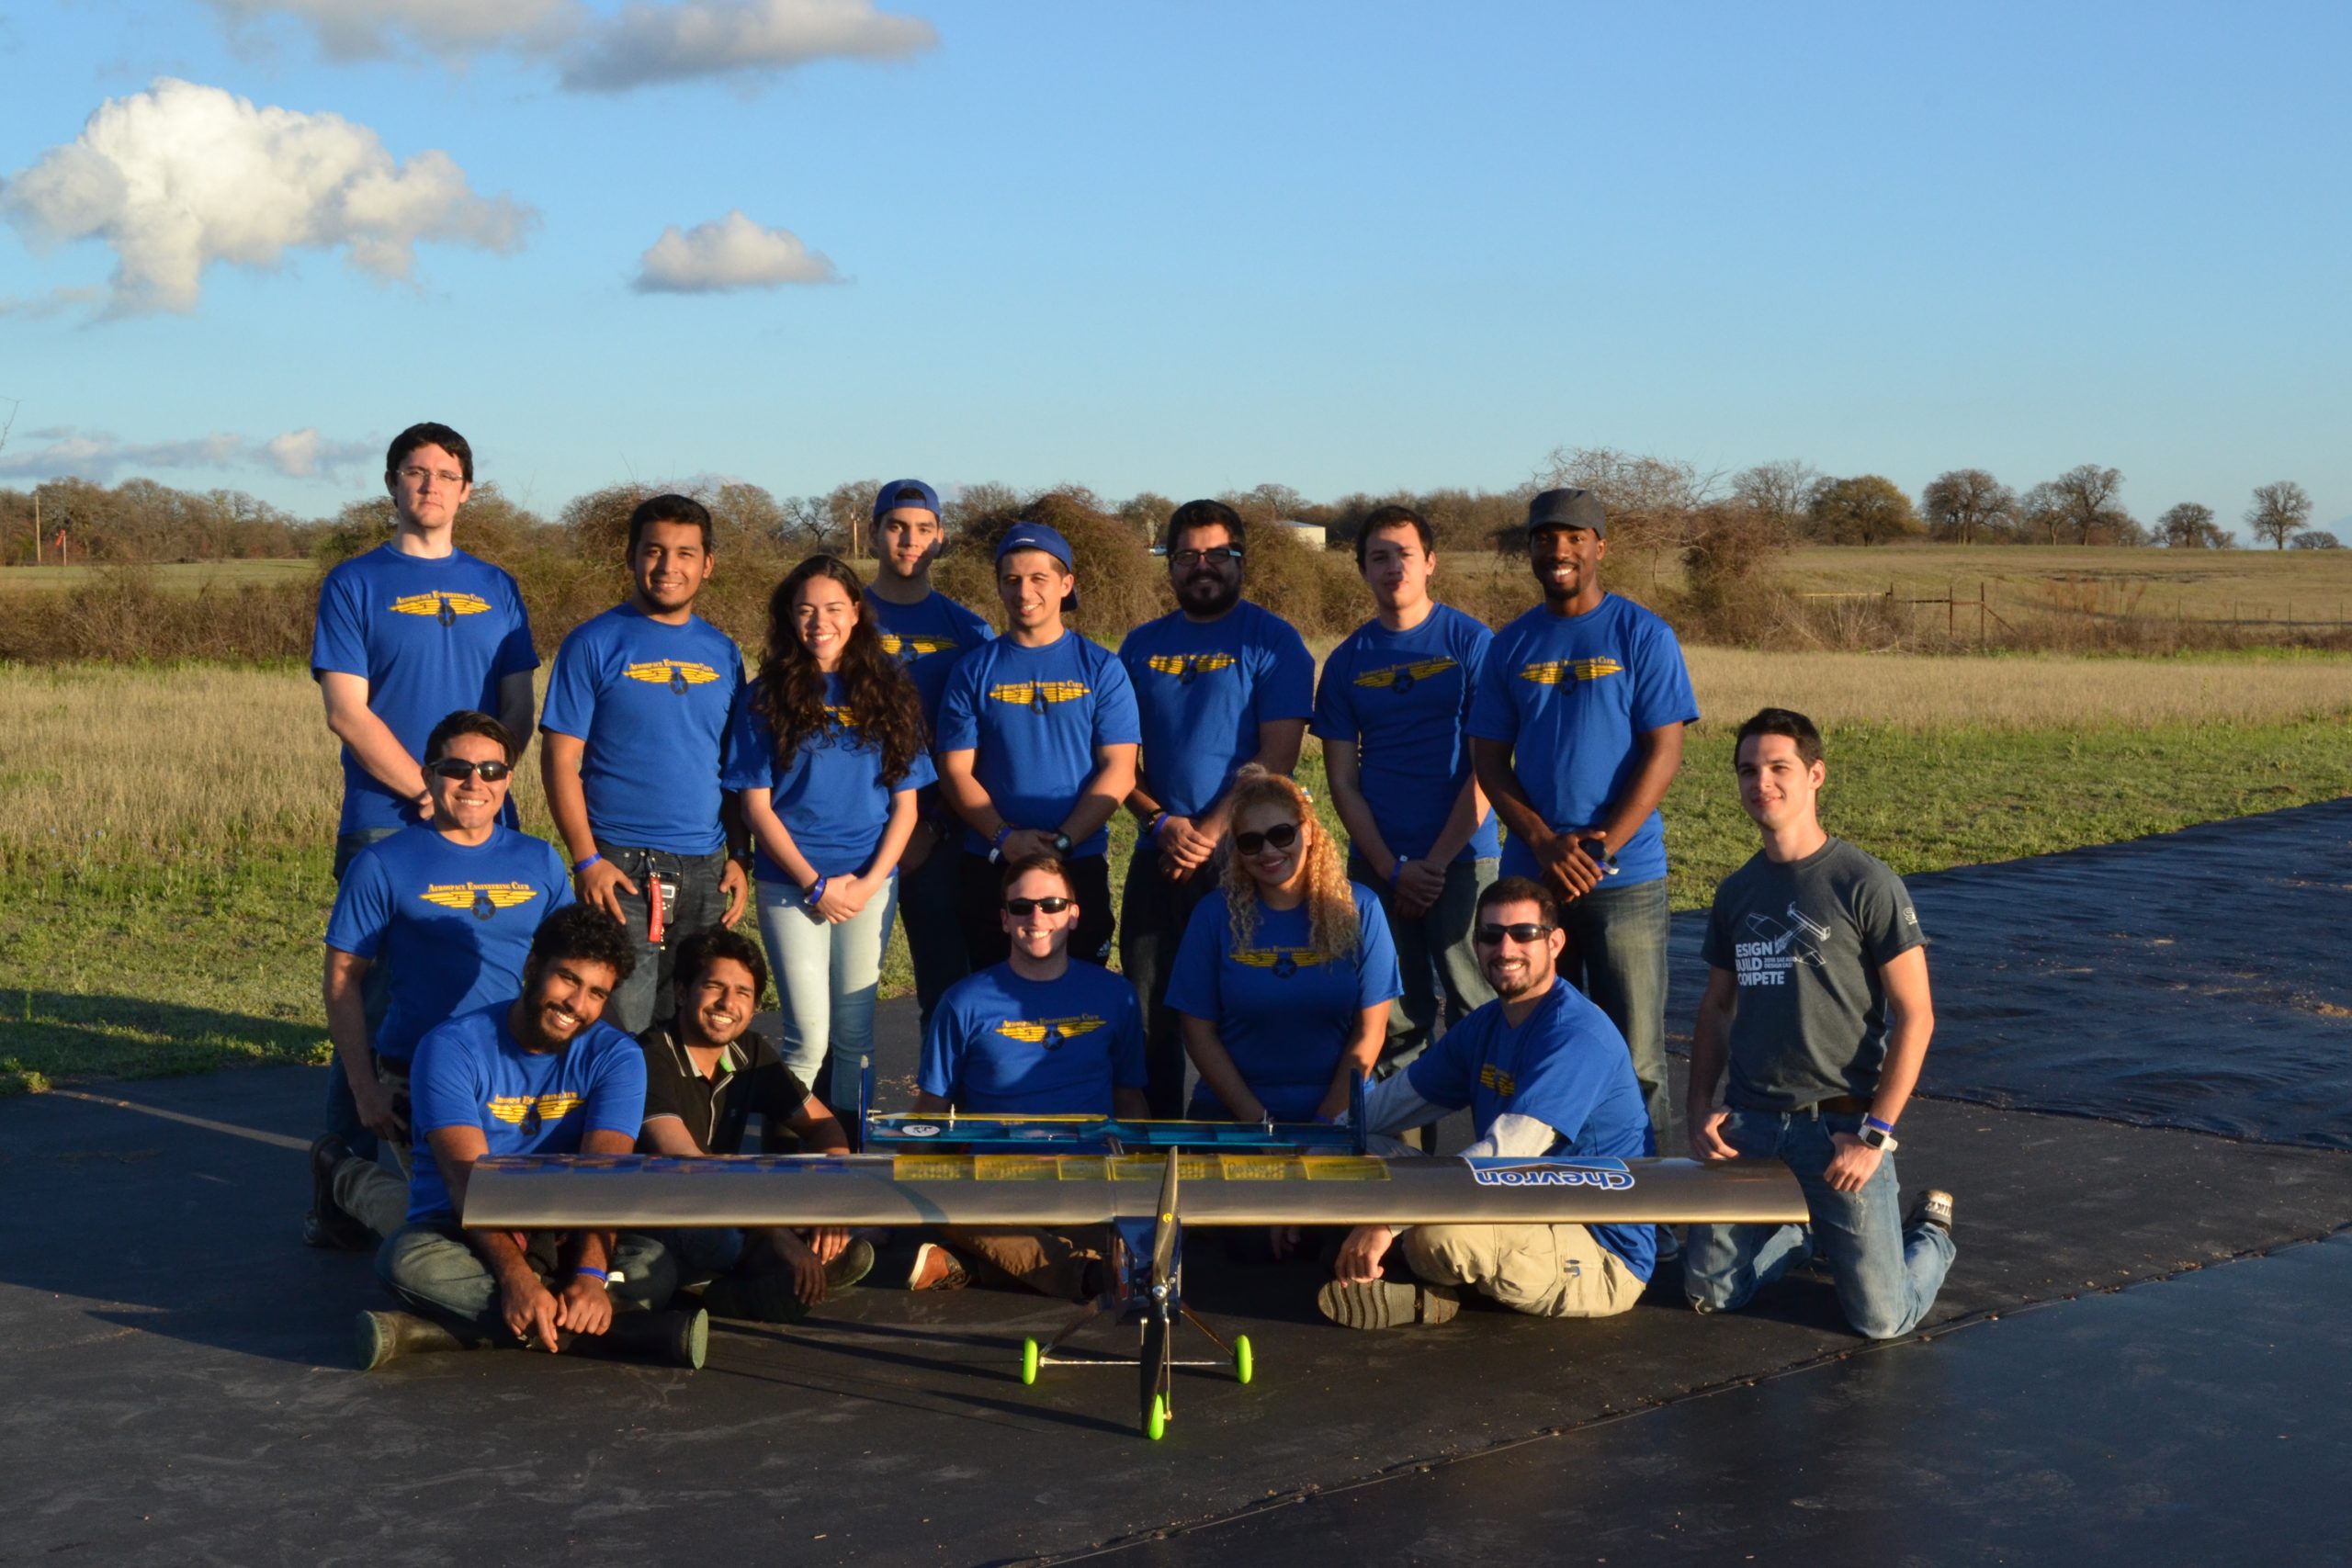 Students take third place at international aerospace competition